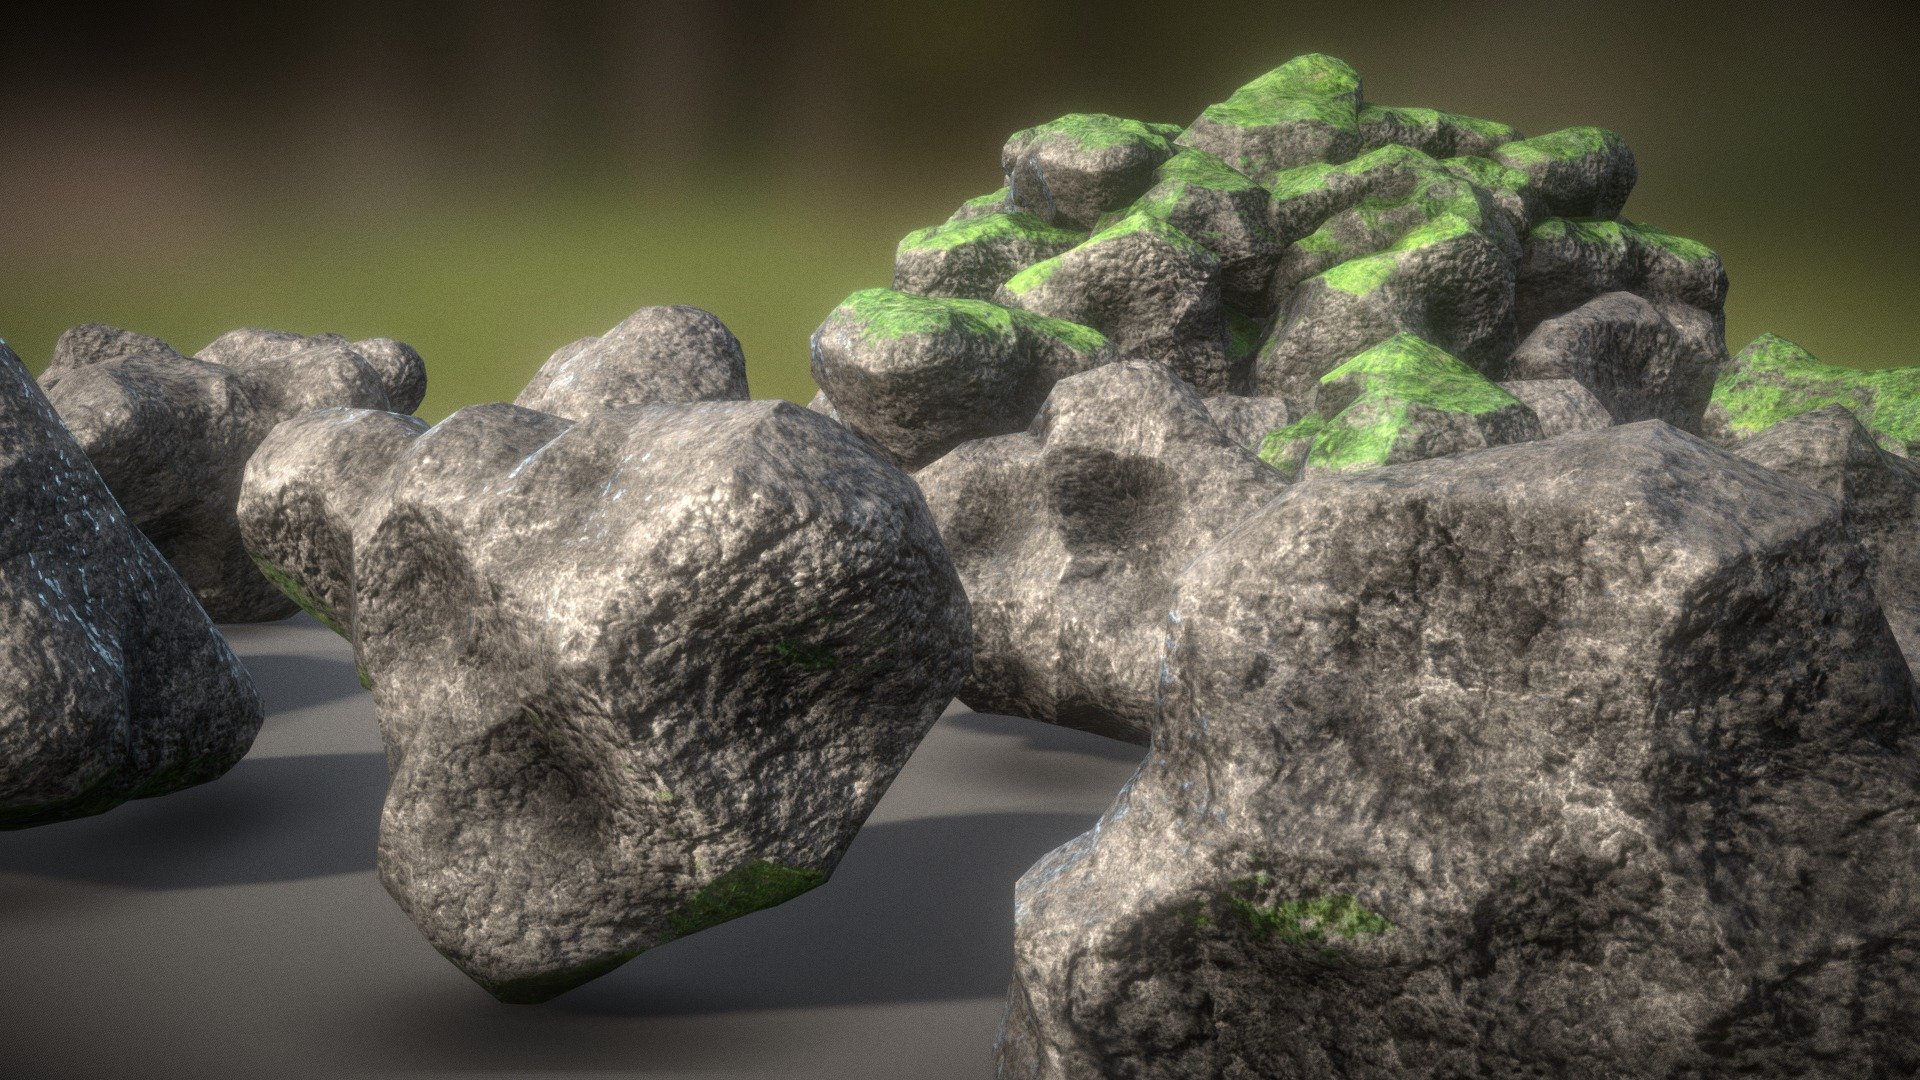 Here is a package of some mossy low-poly mountain cliff rocks for your terrain.
Parts:




Mountain_Cliff_Rock_1 

1.892m x 1.231m x 1.329m

Polygons = 321






Mountain_Cliff_Rock_2 

1.881m x 1.241m x 1.301m

Polygons = 397






Mountain_Cliff_Rock_3 

1.761m x 1.443m x 1.507m

Polygons = 294






Mountain_Cliff_Rock_4 

1.761m x 1.455m x 1.437m

Polygons = 294






Mountain_Cliff_Rock_5 

1.881m x 1.309m x 1.264m

Polygons = 397






Mountain_Cliff_Rock_6 

1.892m x 1.354m x 1.226m

Polygons = 321






Mountain_Cliff_Rock_7 

1.881m x 1.253m x 1.306m

Polygons = 397






Mountain_Cliff_Rock_8 

1.761m x 1.442m x 1.491m

Polygons = 294






Mountain_Cliff_Rock_9 

1.892m x 1.218m x 1.327m

Polygons = 321



Texture map types (4K): 




Base Color

Normal

Metalness

Roughness



Last update:
11:28:06  14.04.22






3d modeled and textured by 3DHaupt in Blender-3.0.


 - Mountain Cliff Rock Package (Low-Poly) - Buy Royalty Free 3D model by VIS-All-3D (@VIS-All) 3d model